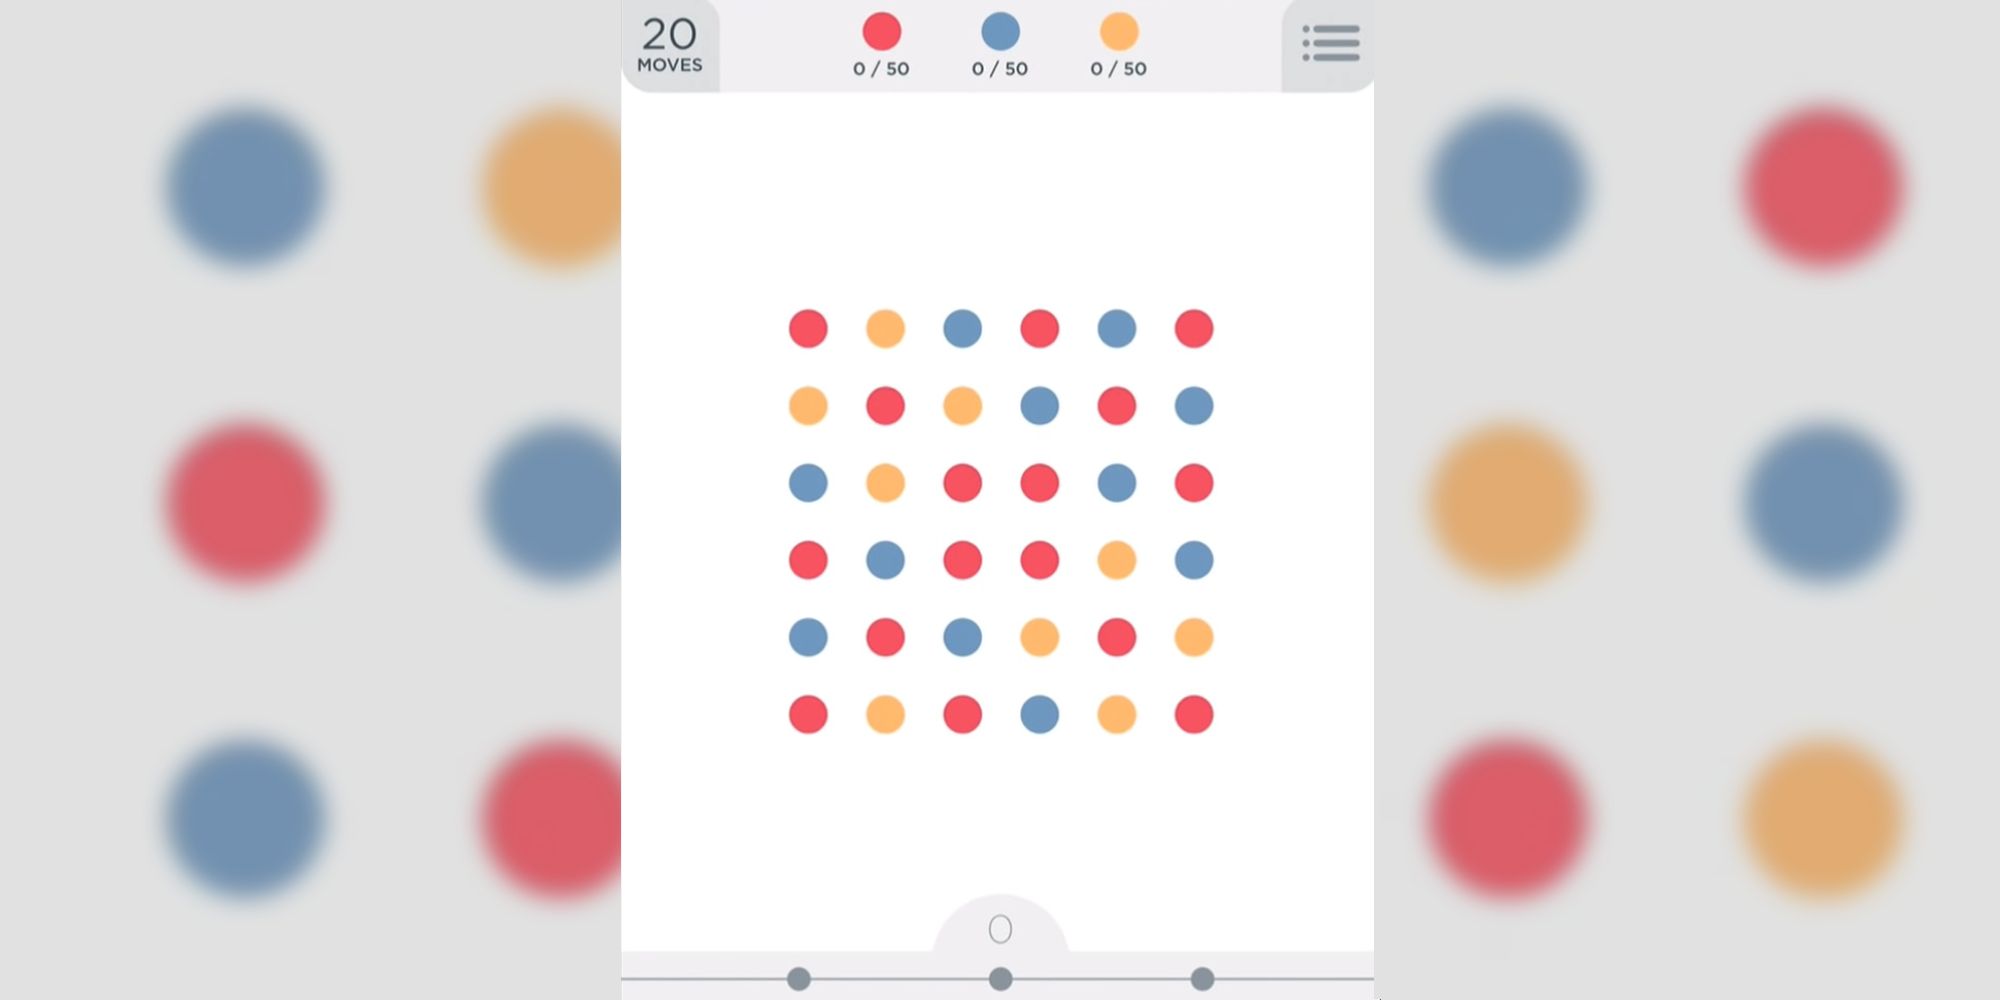 two dots gameplay showing level 